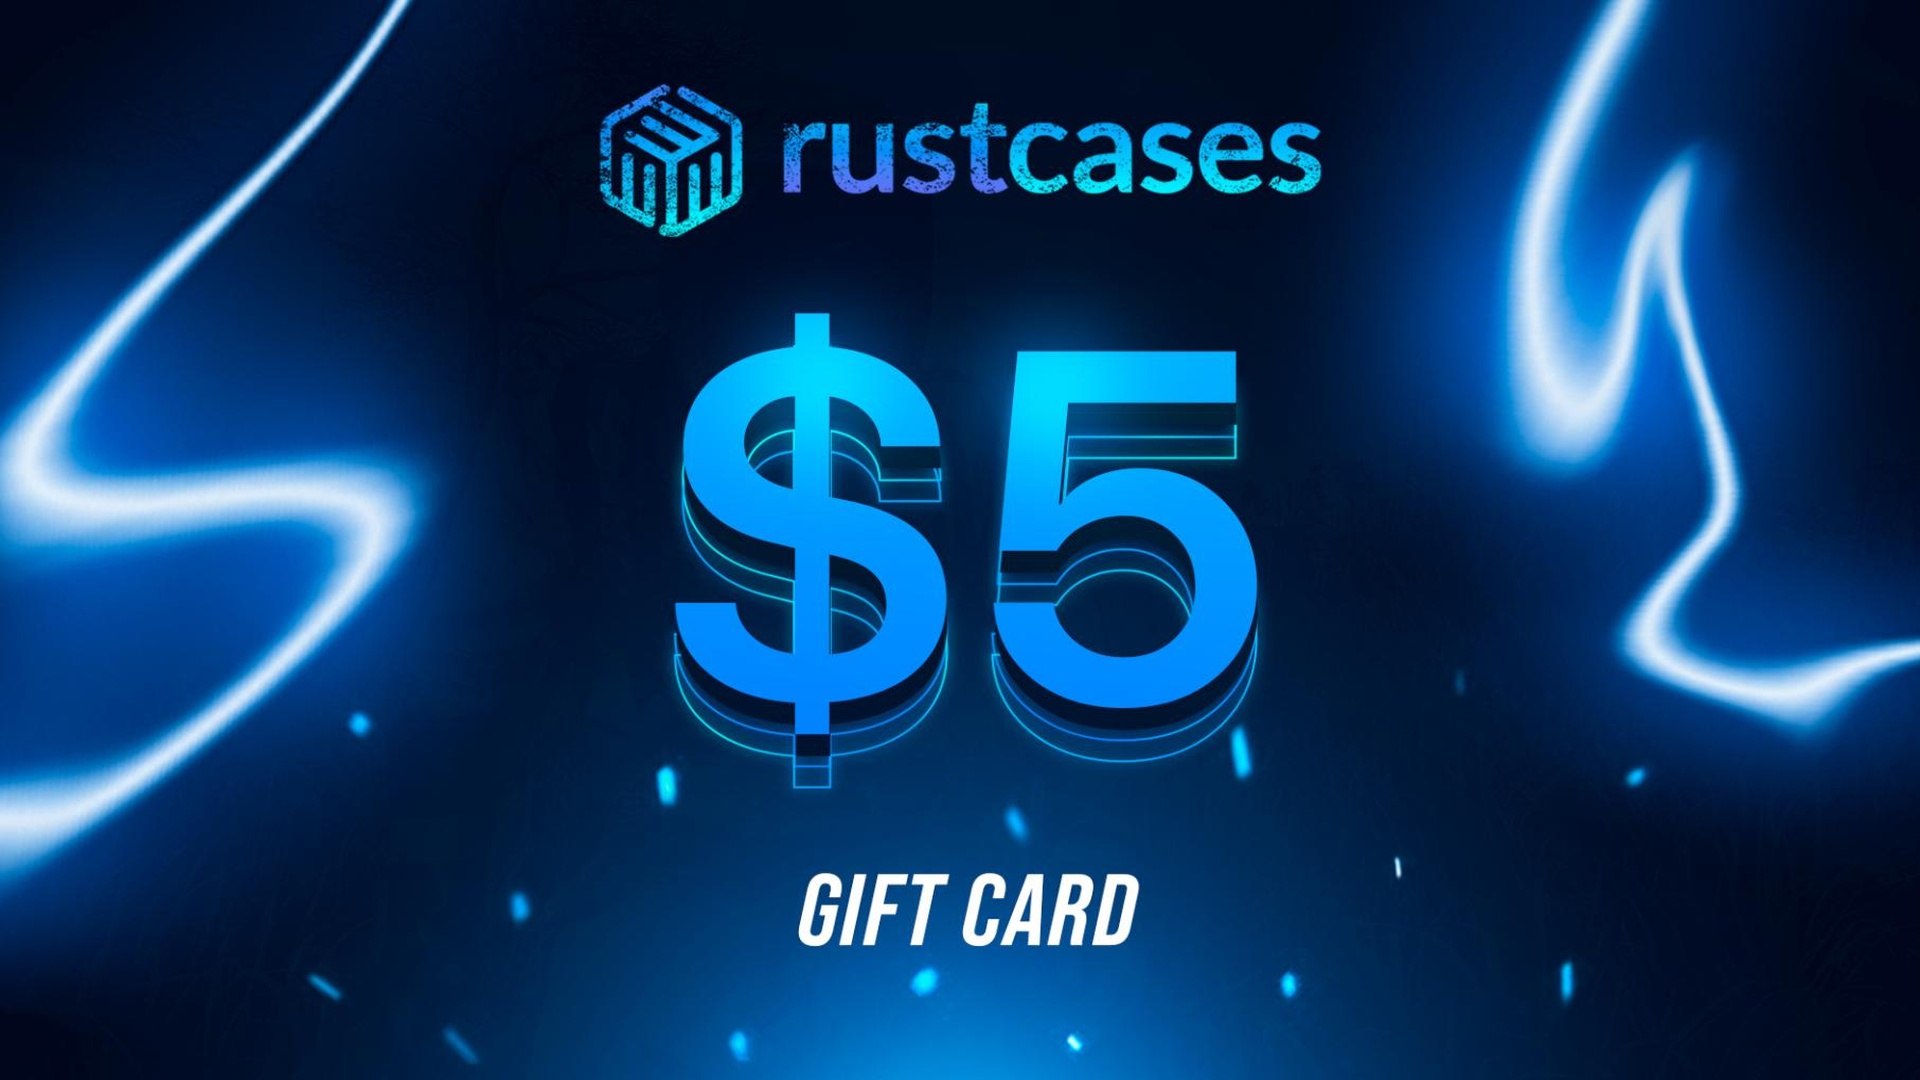 RUSTCASES.com $5 Gift Card $5.38